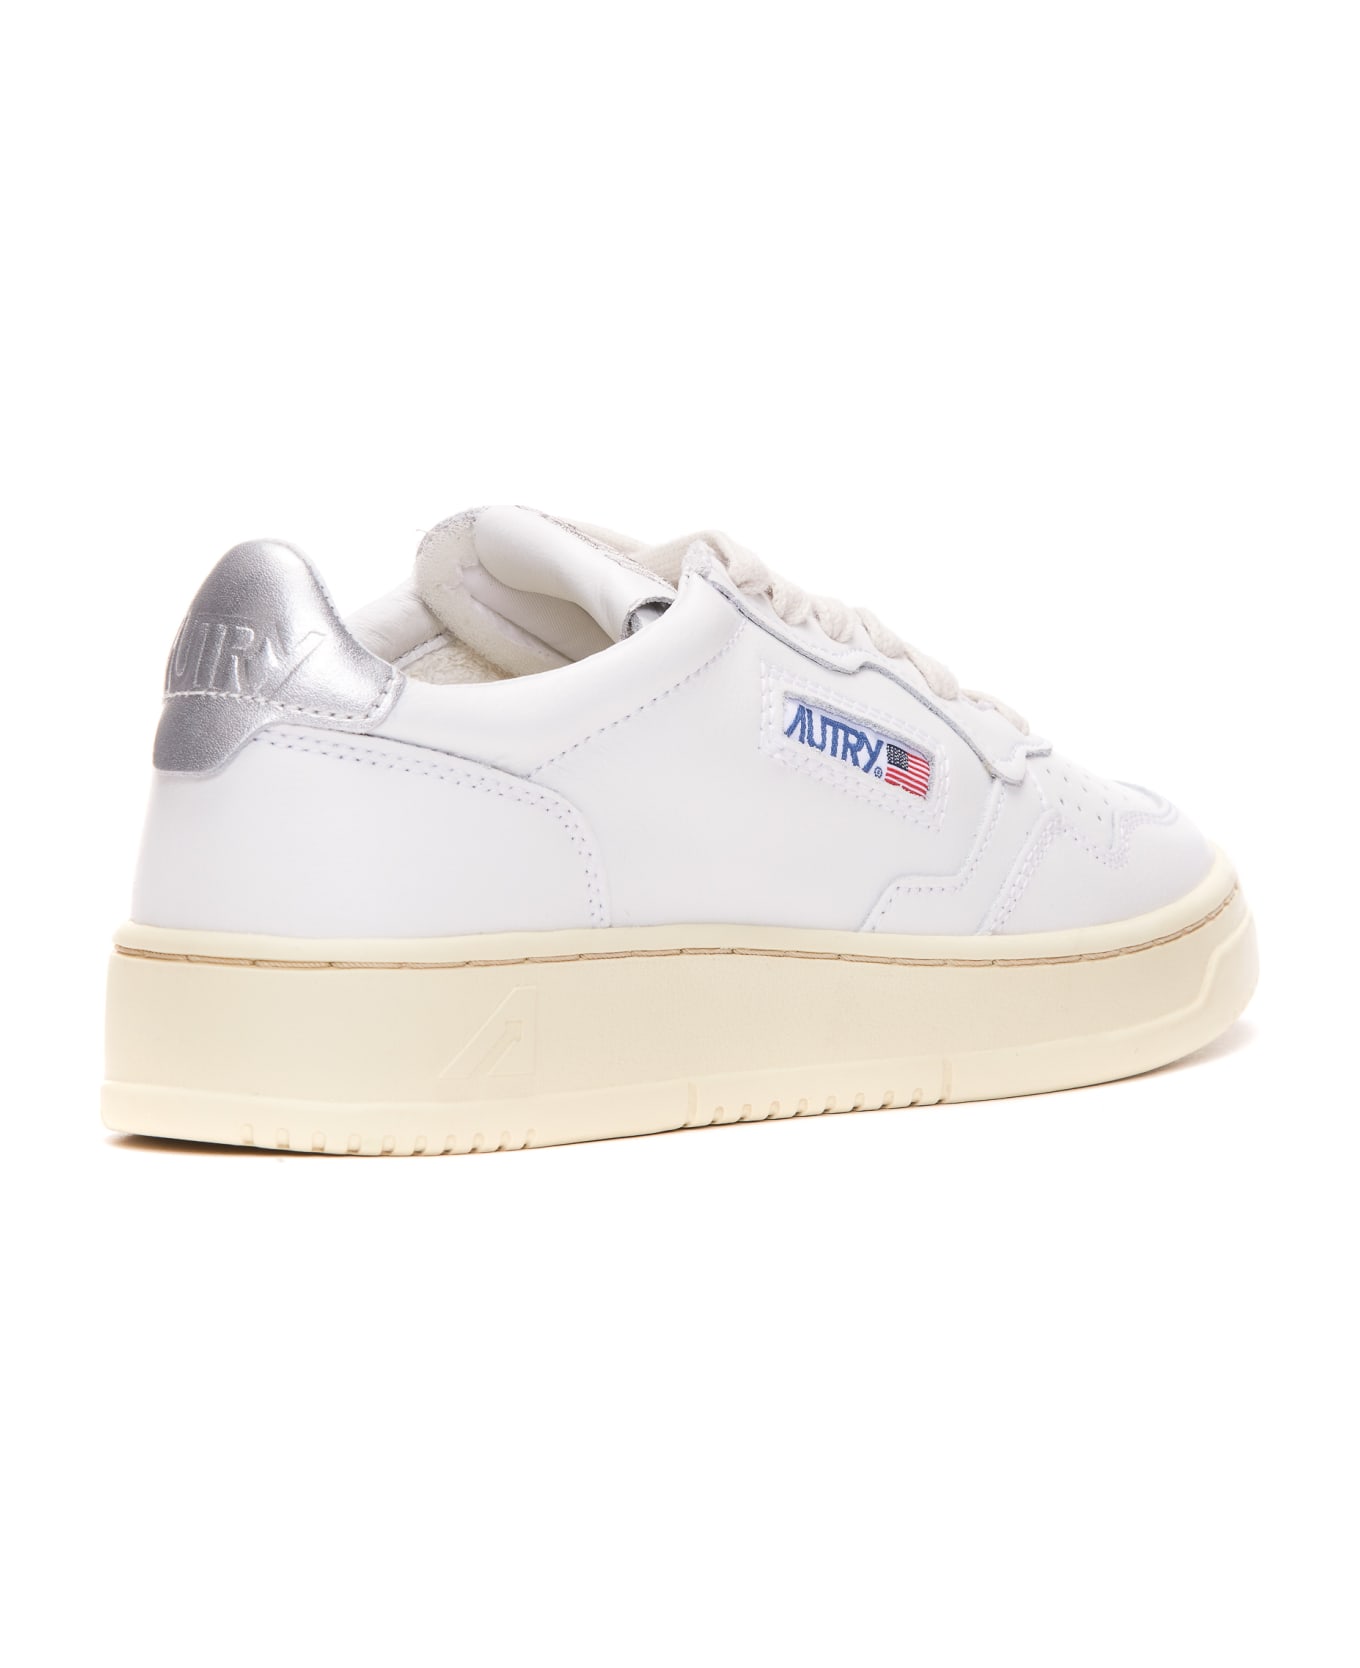 Autry Medalist Sneakers - Wht/silver